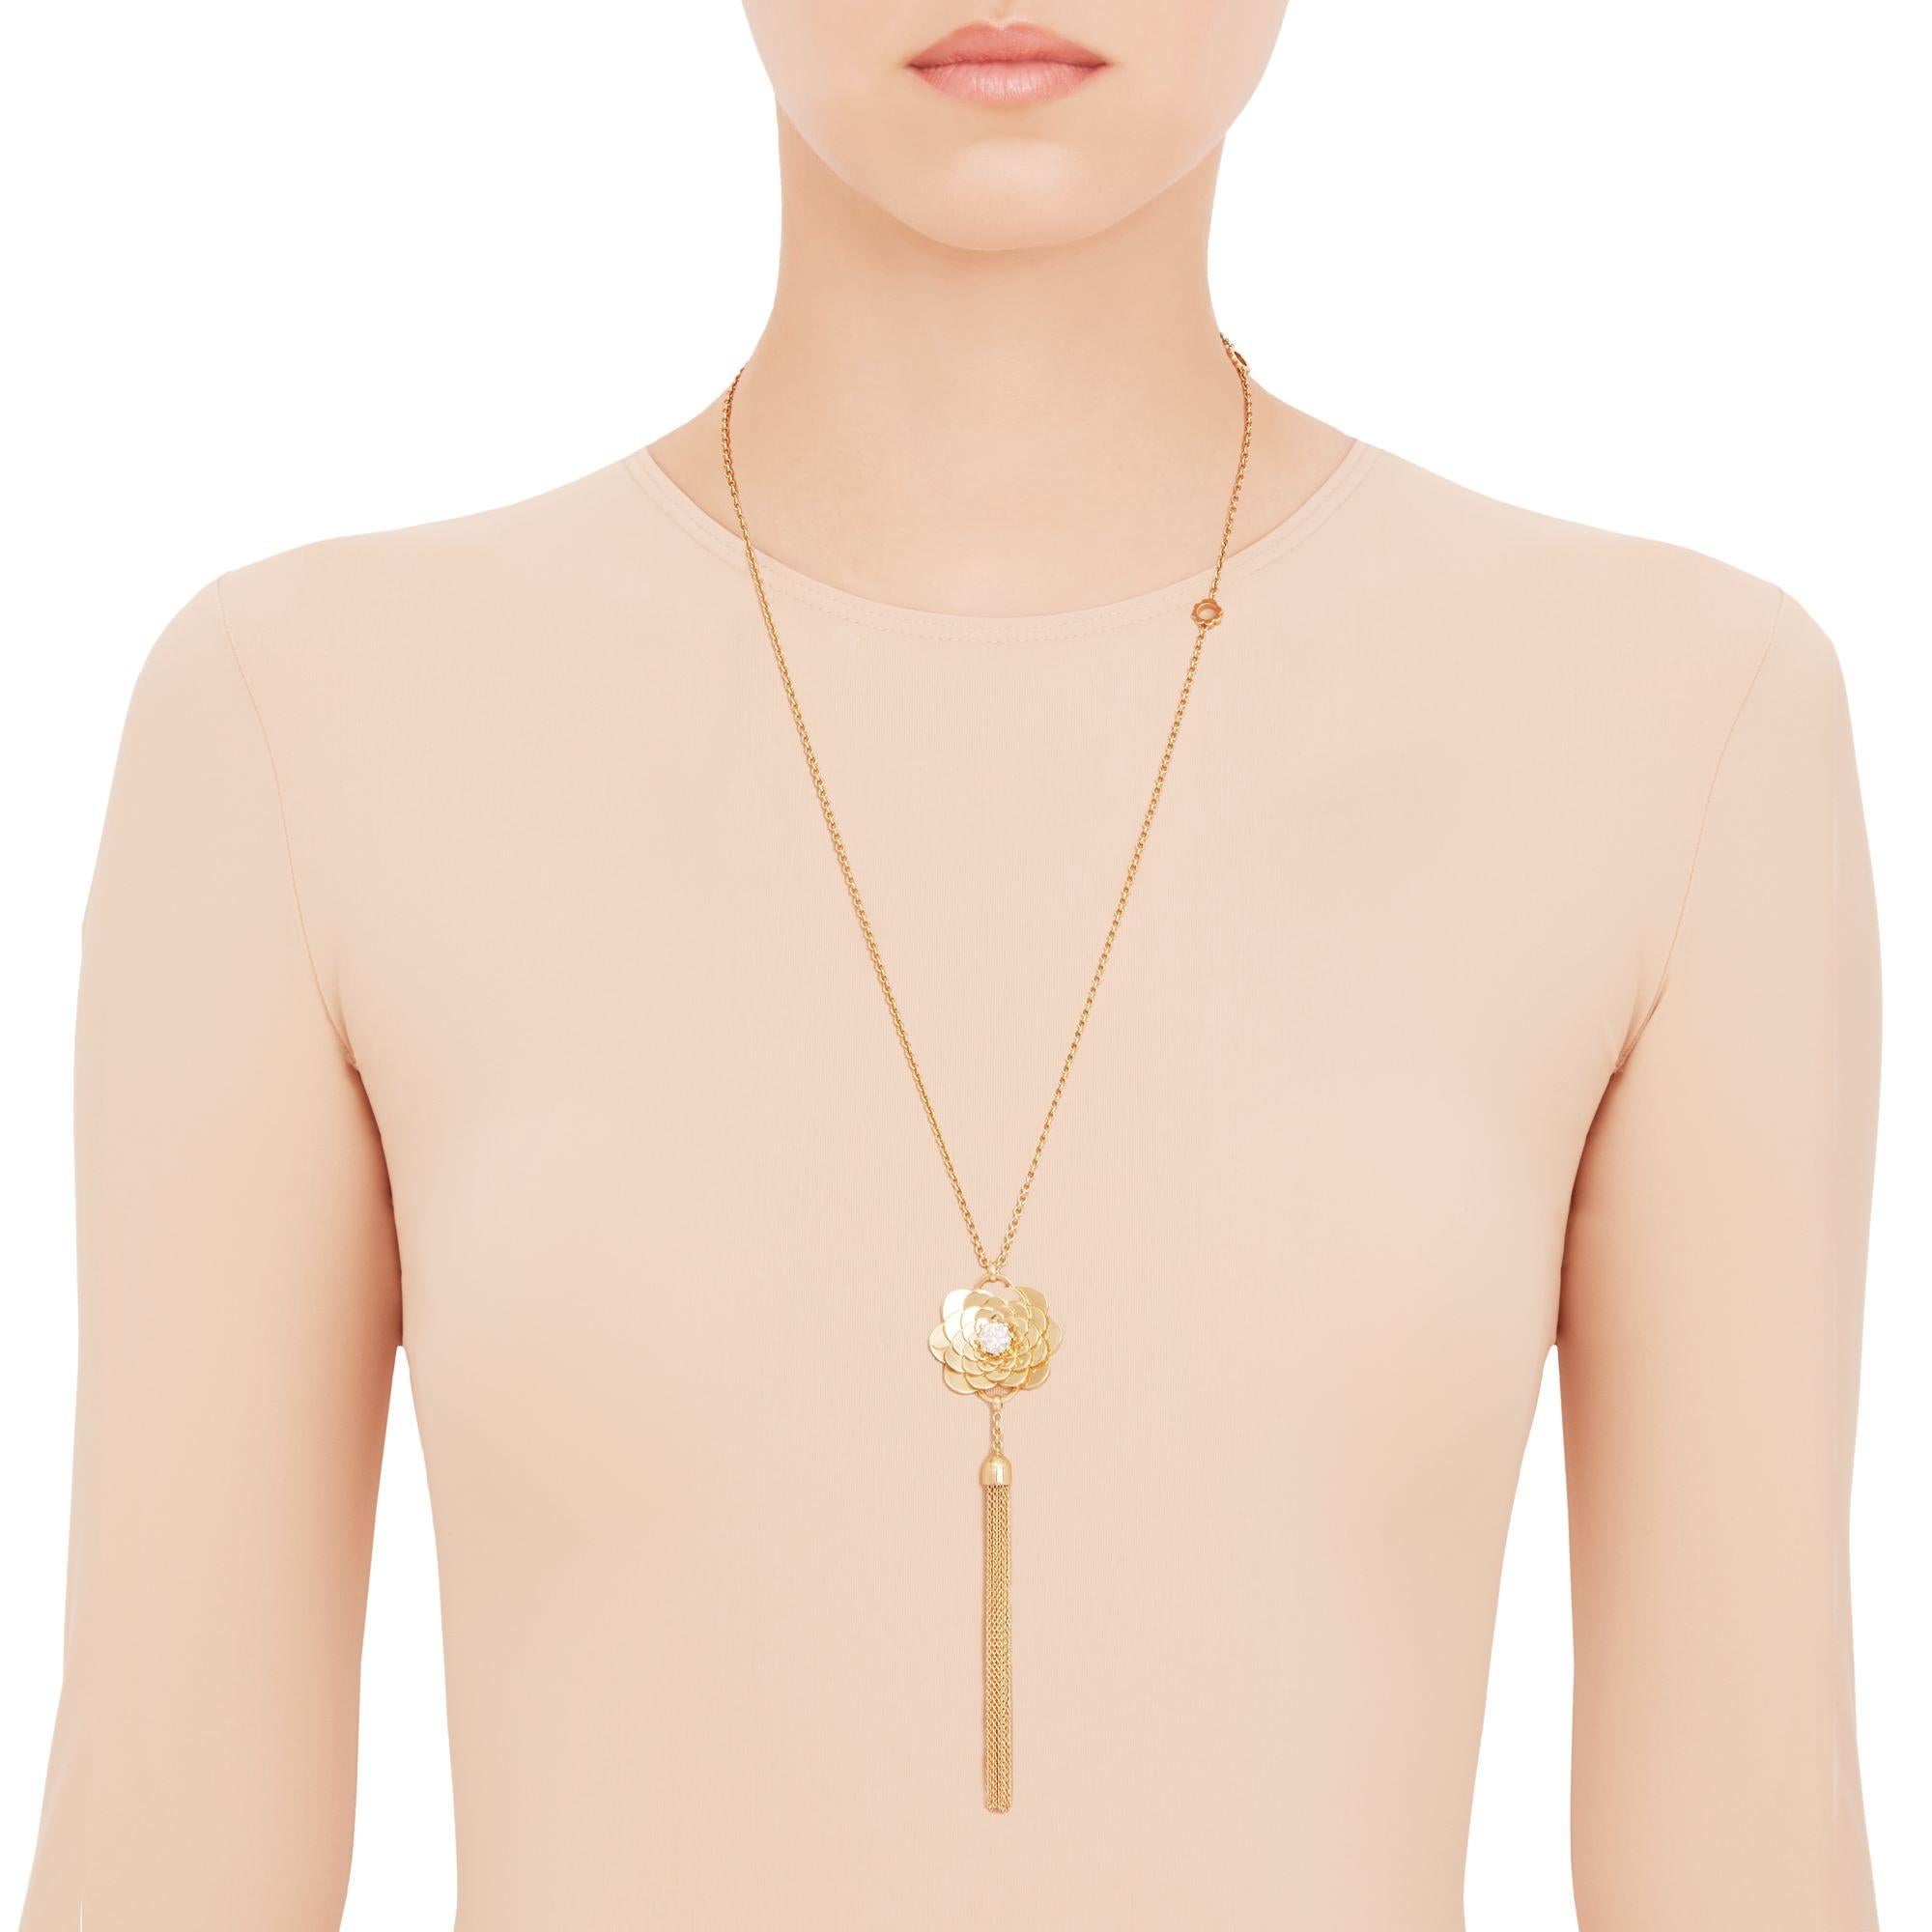 Contemporary 18K Yellow Gold Pendant Necklace with White Diamonds